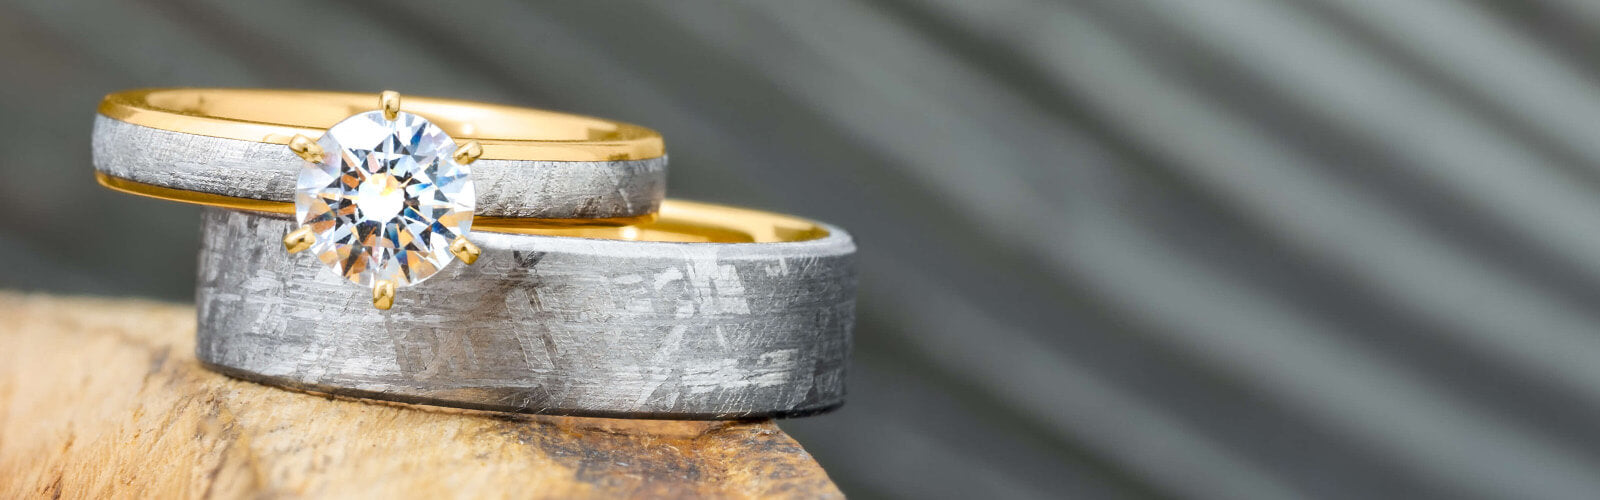 Authentic Meteorite Wedding Band with Polished Gold | Jewelry by Johan -  Jewelry by Johan | Meteorite wedding band, Handmade wedding band, Jewelry  by johan